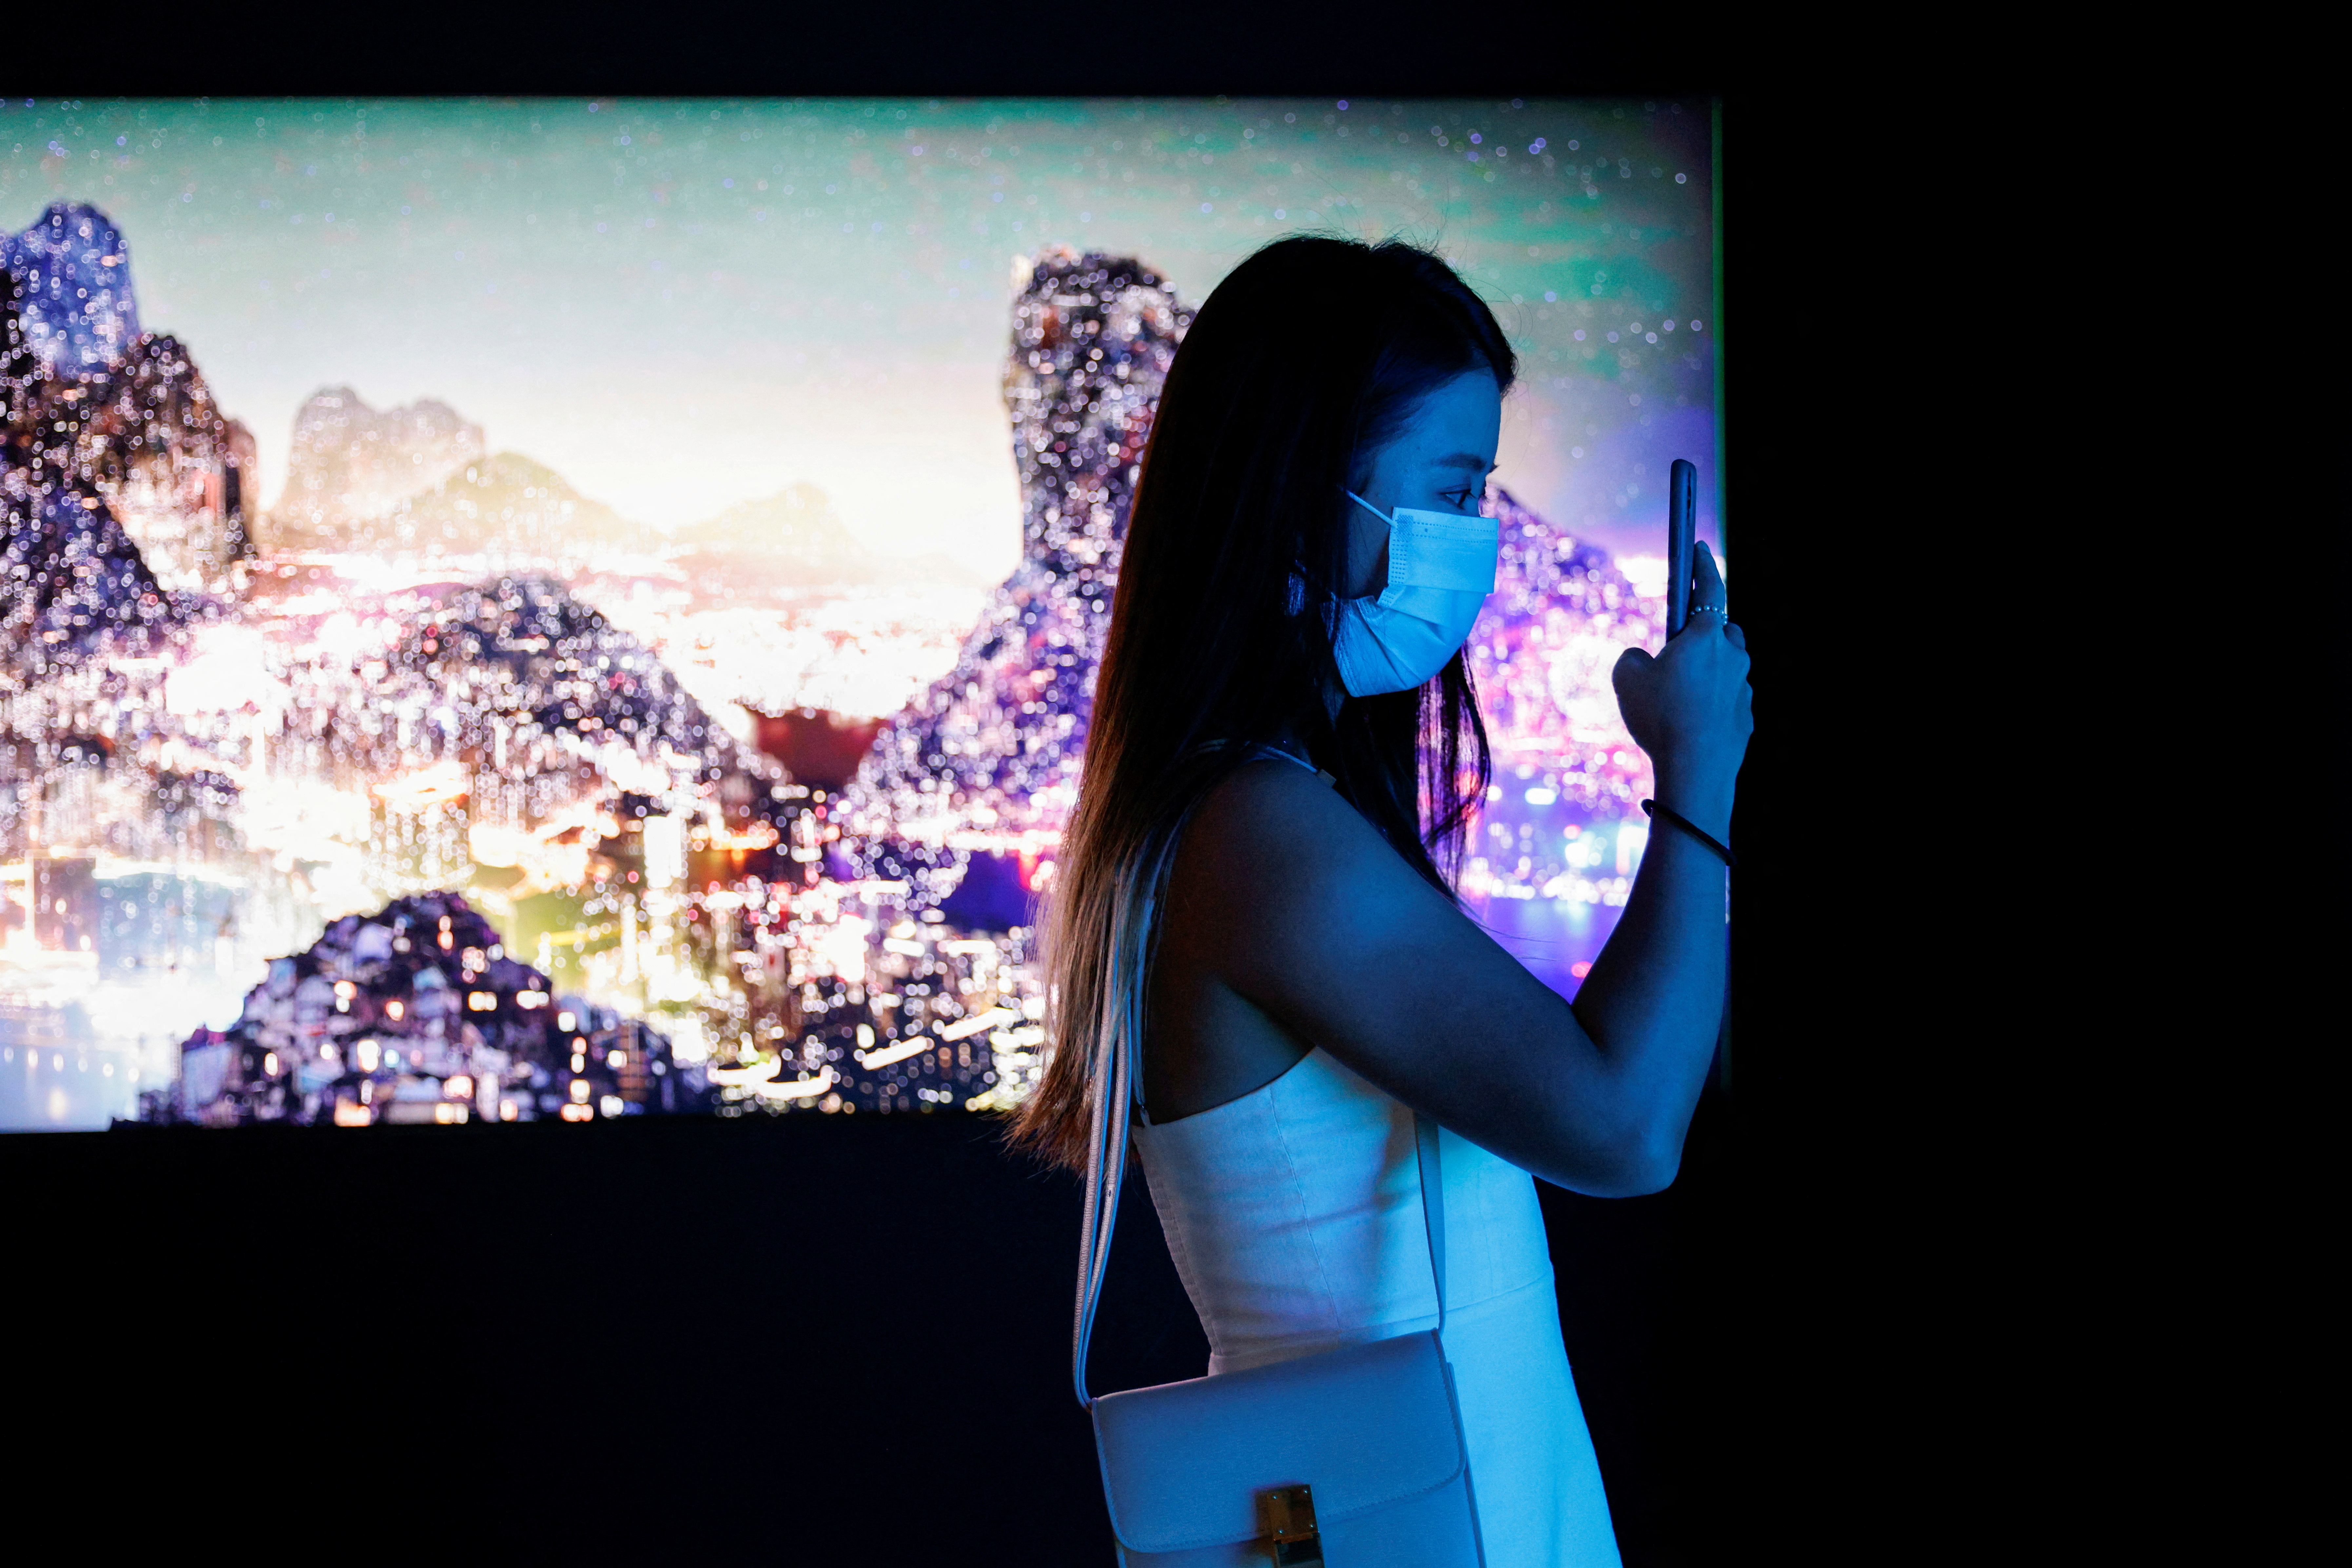 Visitor takes a photo in front of a video installation which will be converted into NFTs and auctioned online at Sotheby's, in Hong Kong